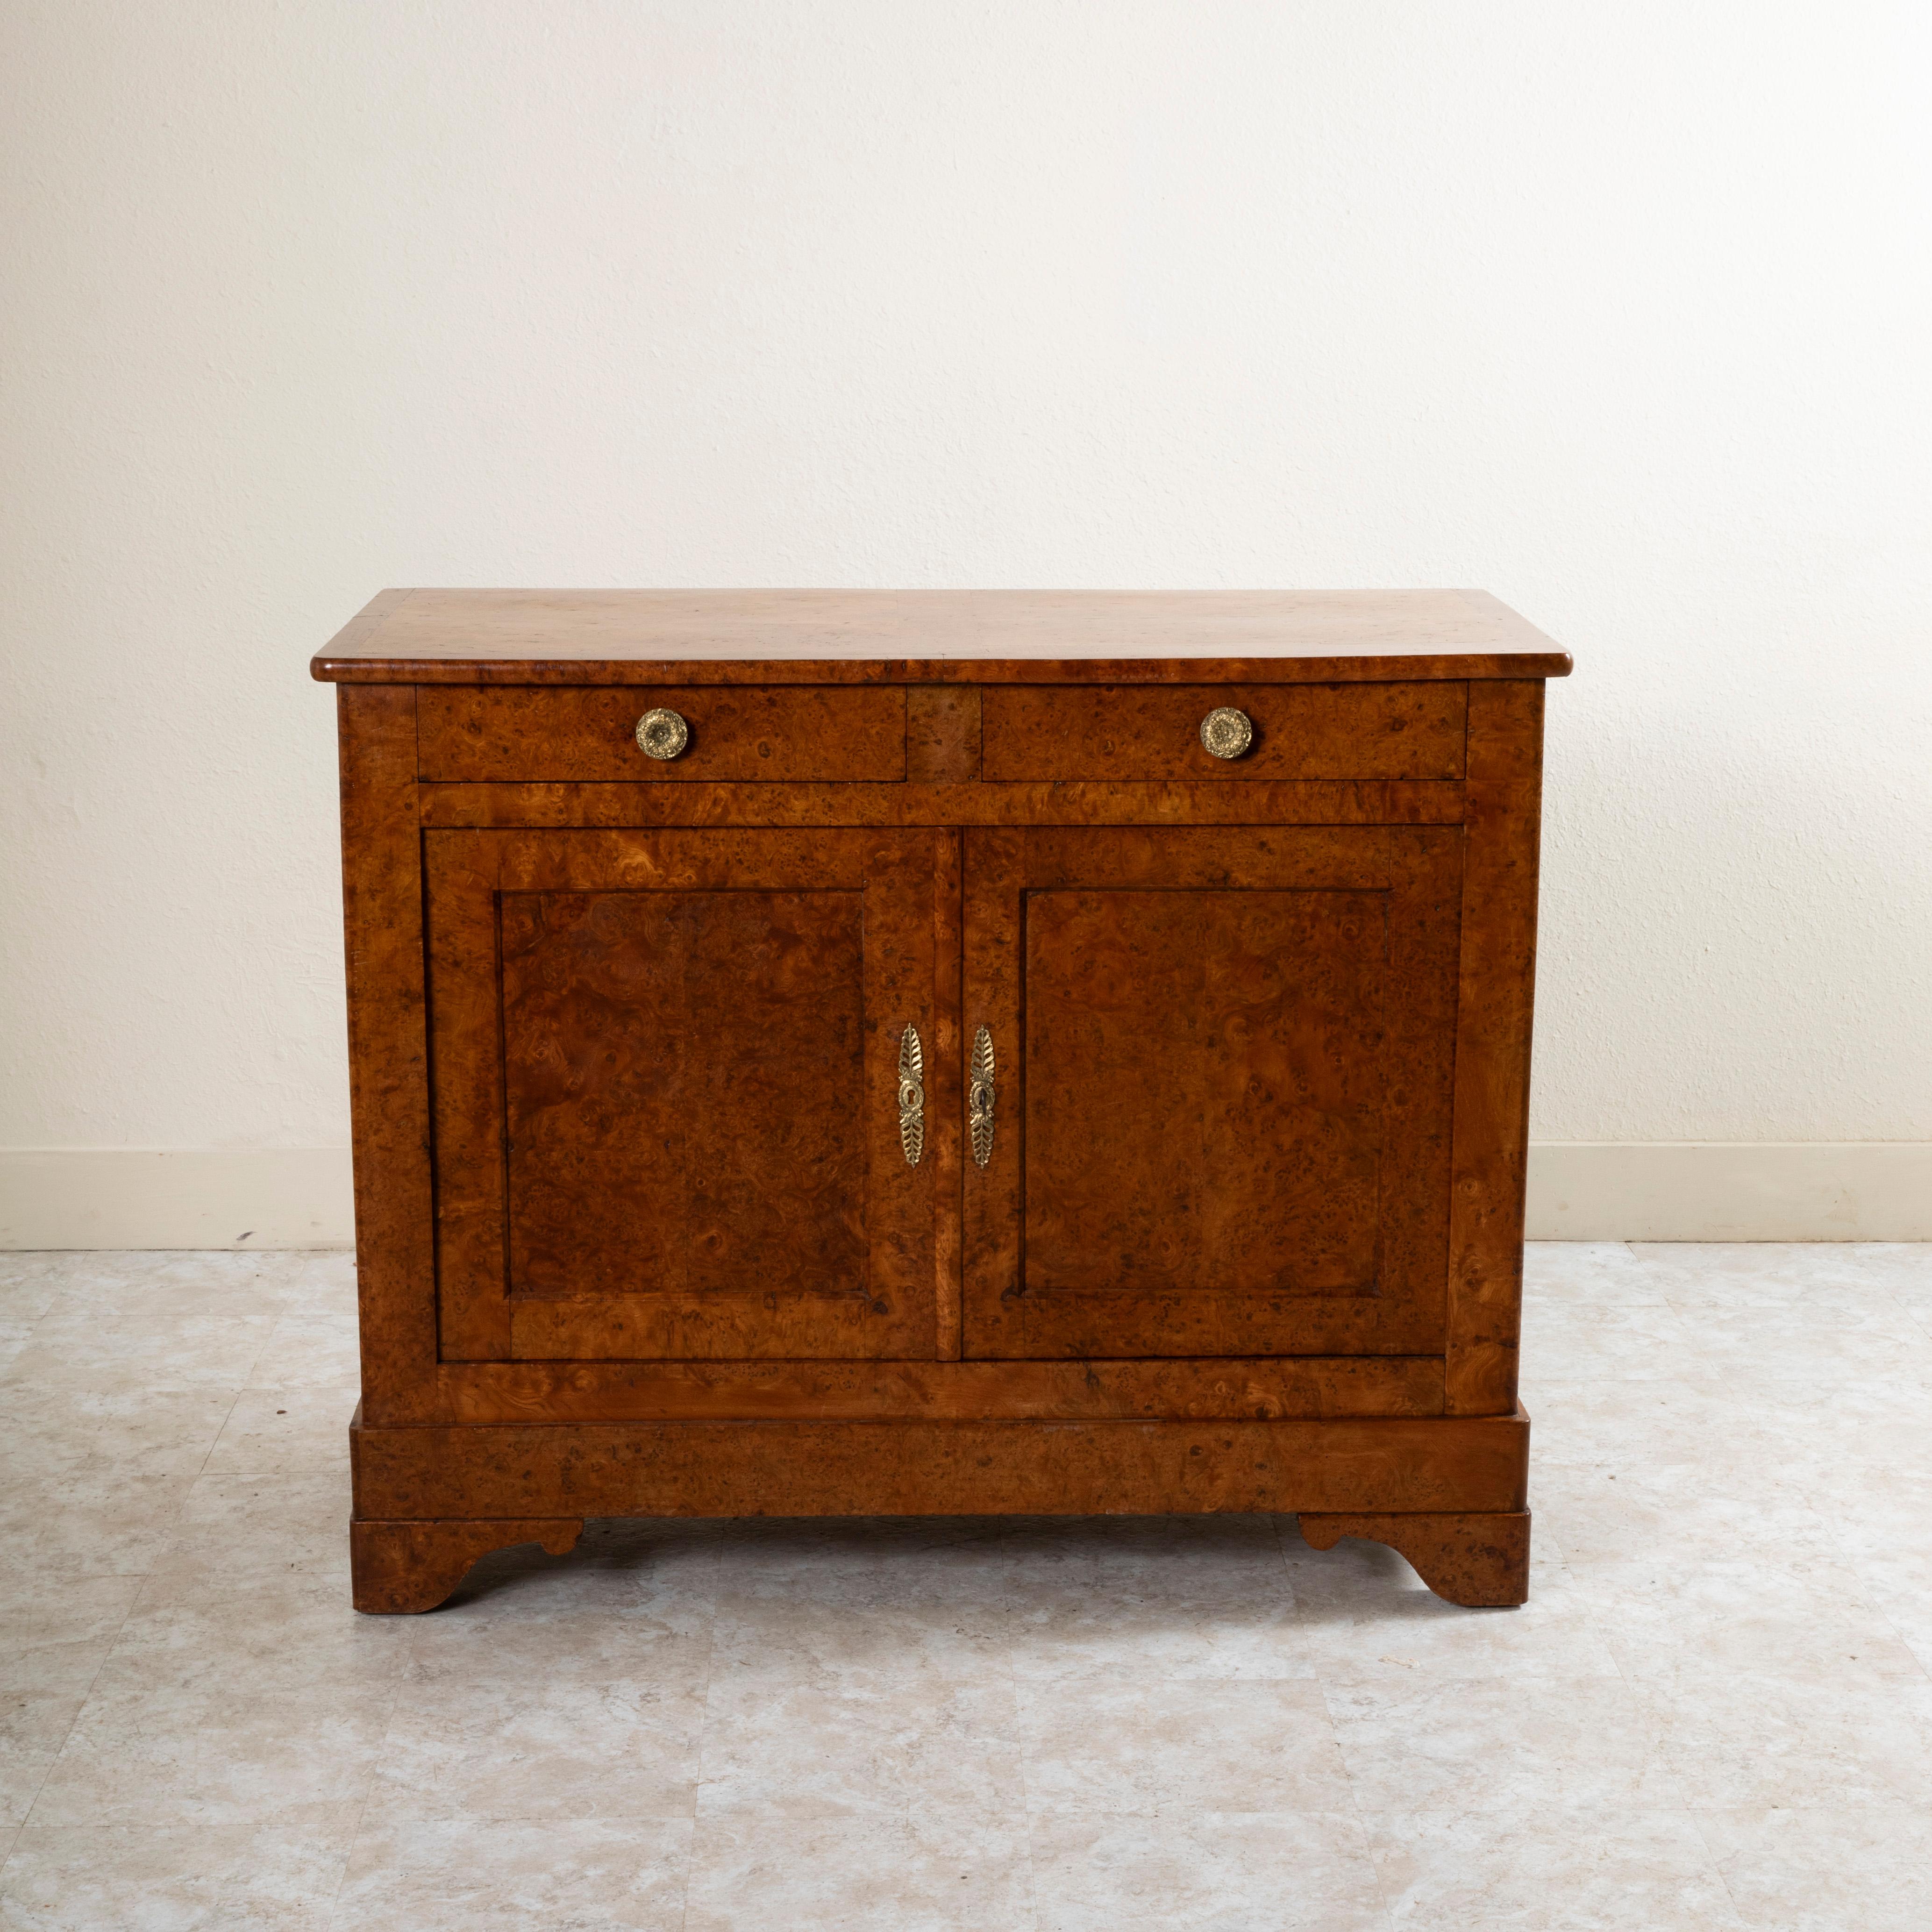 This Louis Philippe period buffet from the nineteenth century is constructed of solid burl elm. It features two upper drawers fitted with bronze drawer pulls detailed with a central rosette, shells, flowers and scrolling. Two lower doors open to